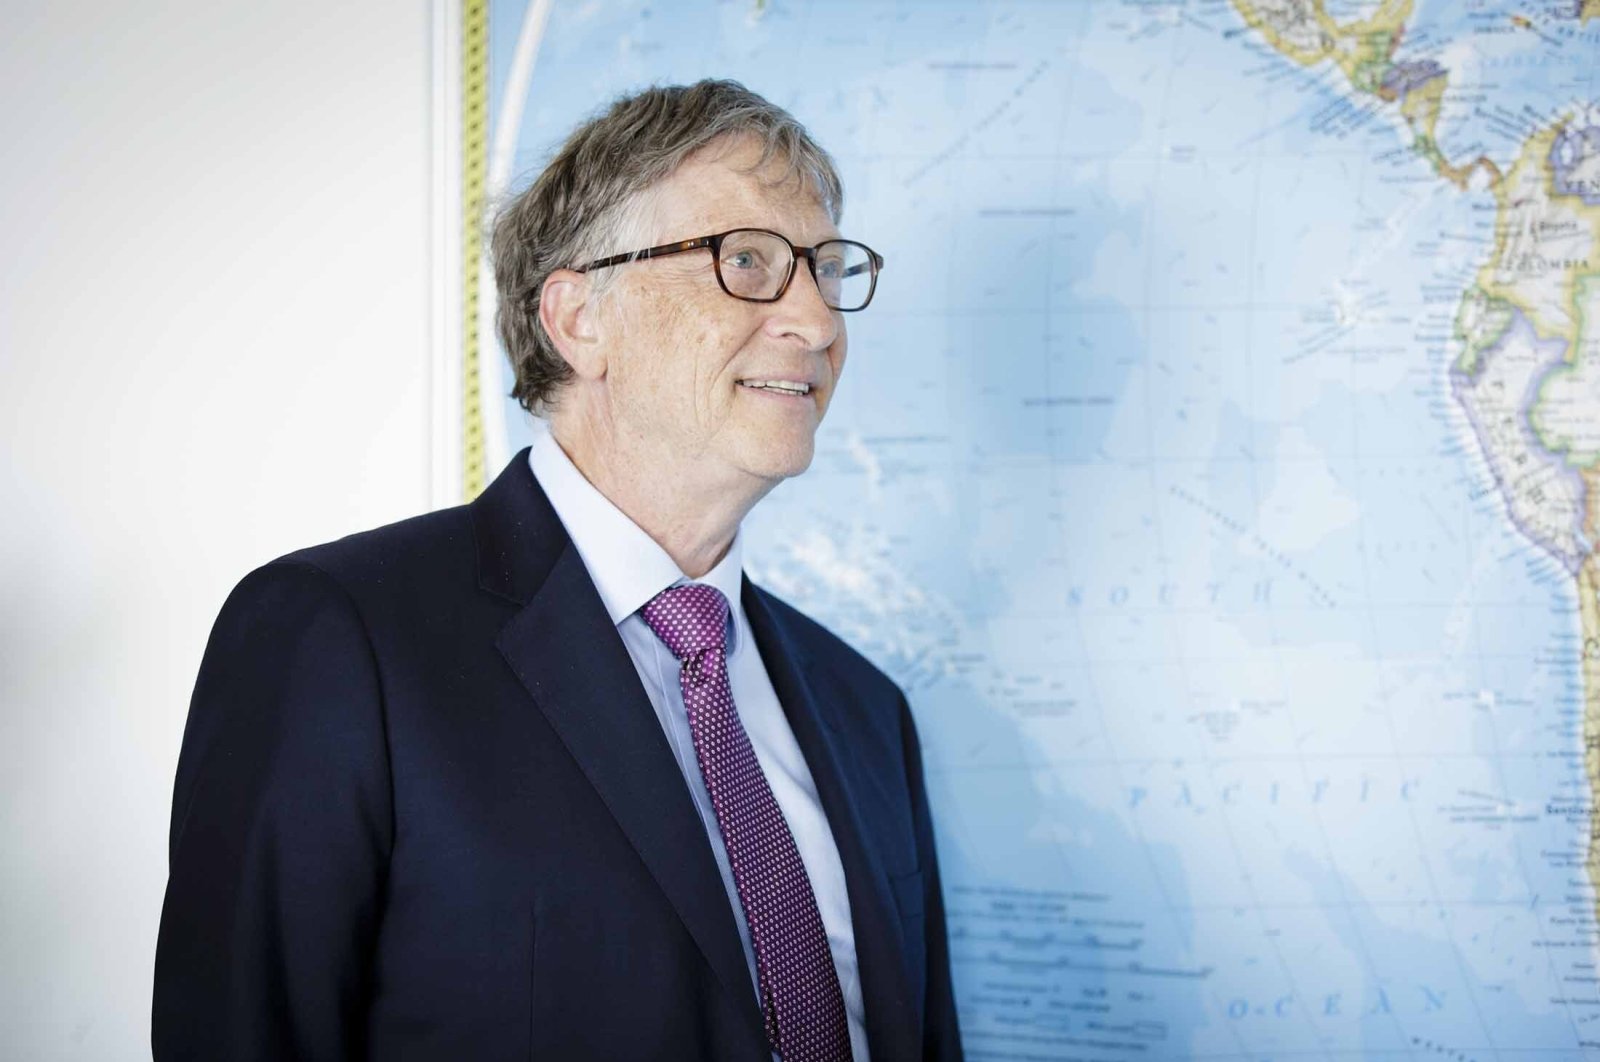 Bill Gates attends an event in Berlin, Germany, April 19, 2018. (GETTY IMAGES) 